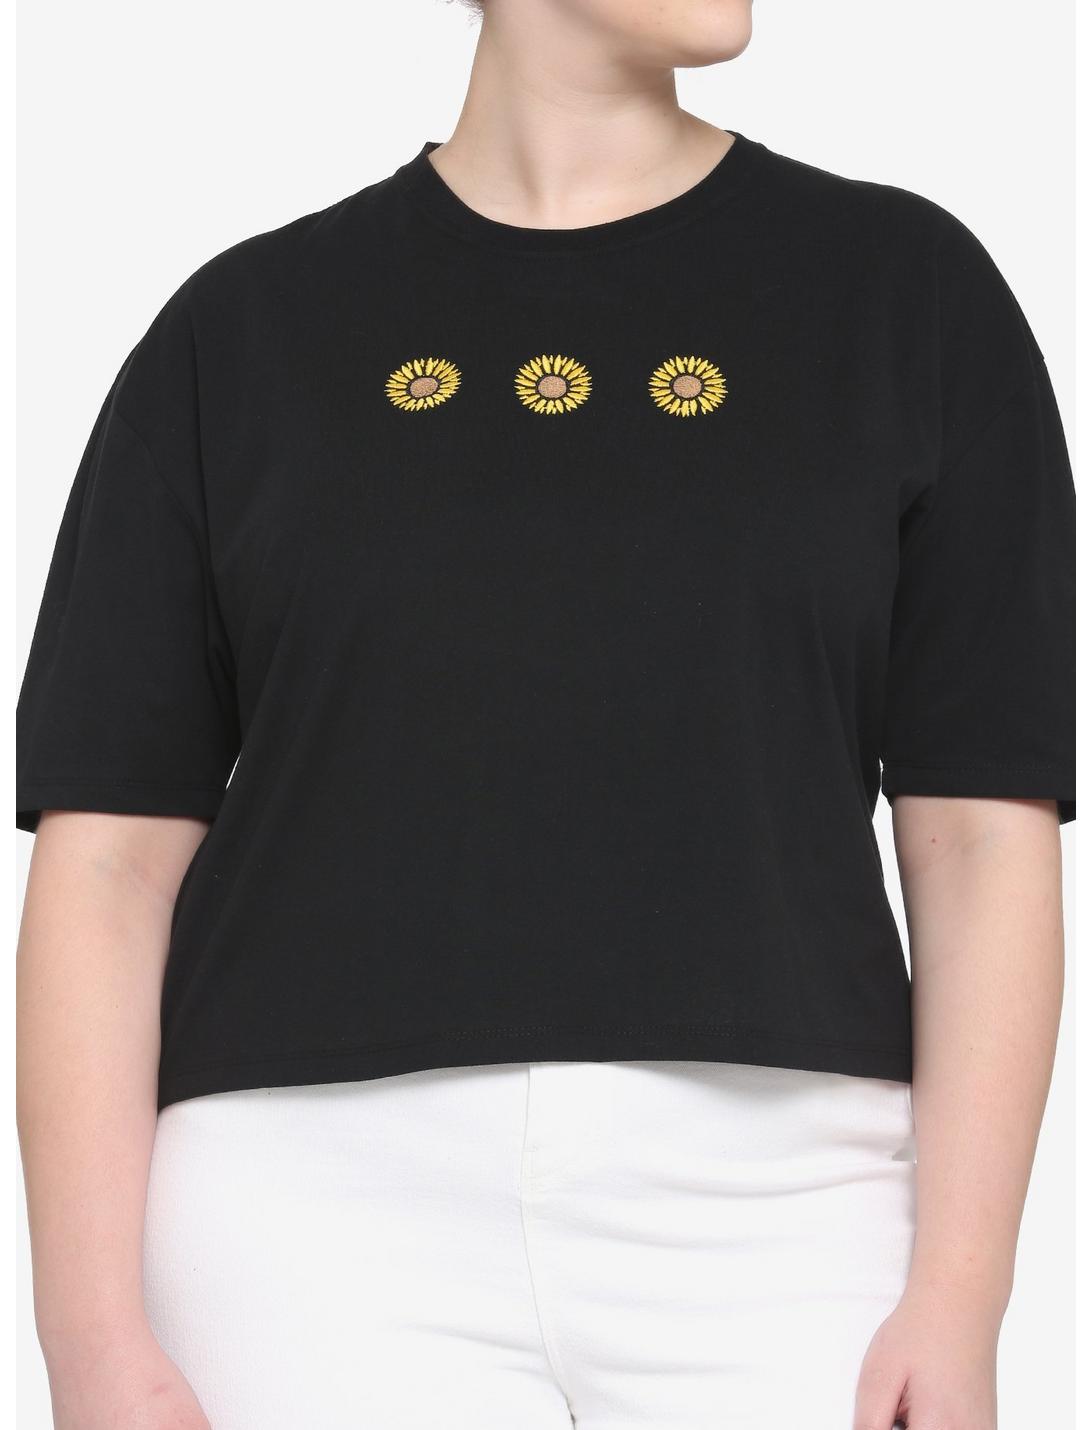 Embroidered Sunflower Boxy Girls Crop T-Shirt Plus Size, BLACK, hi-res